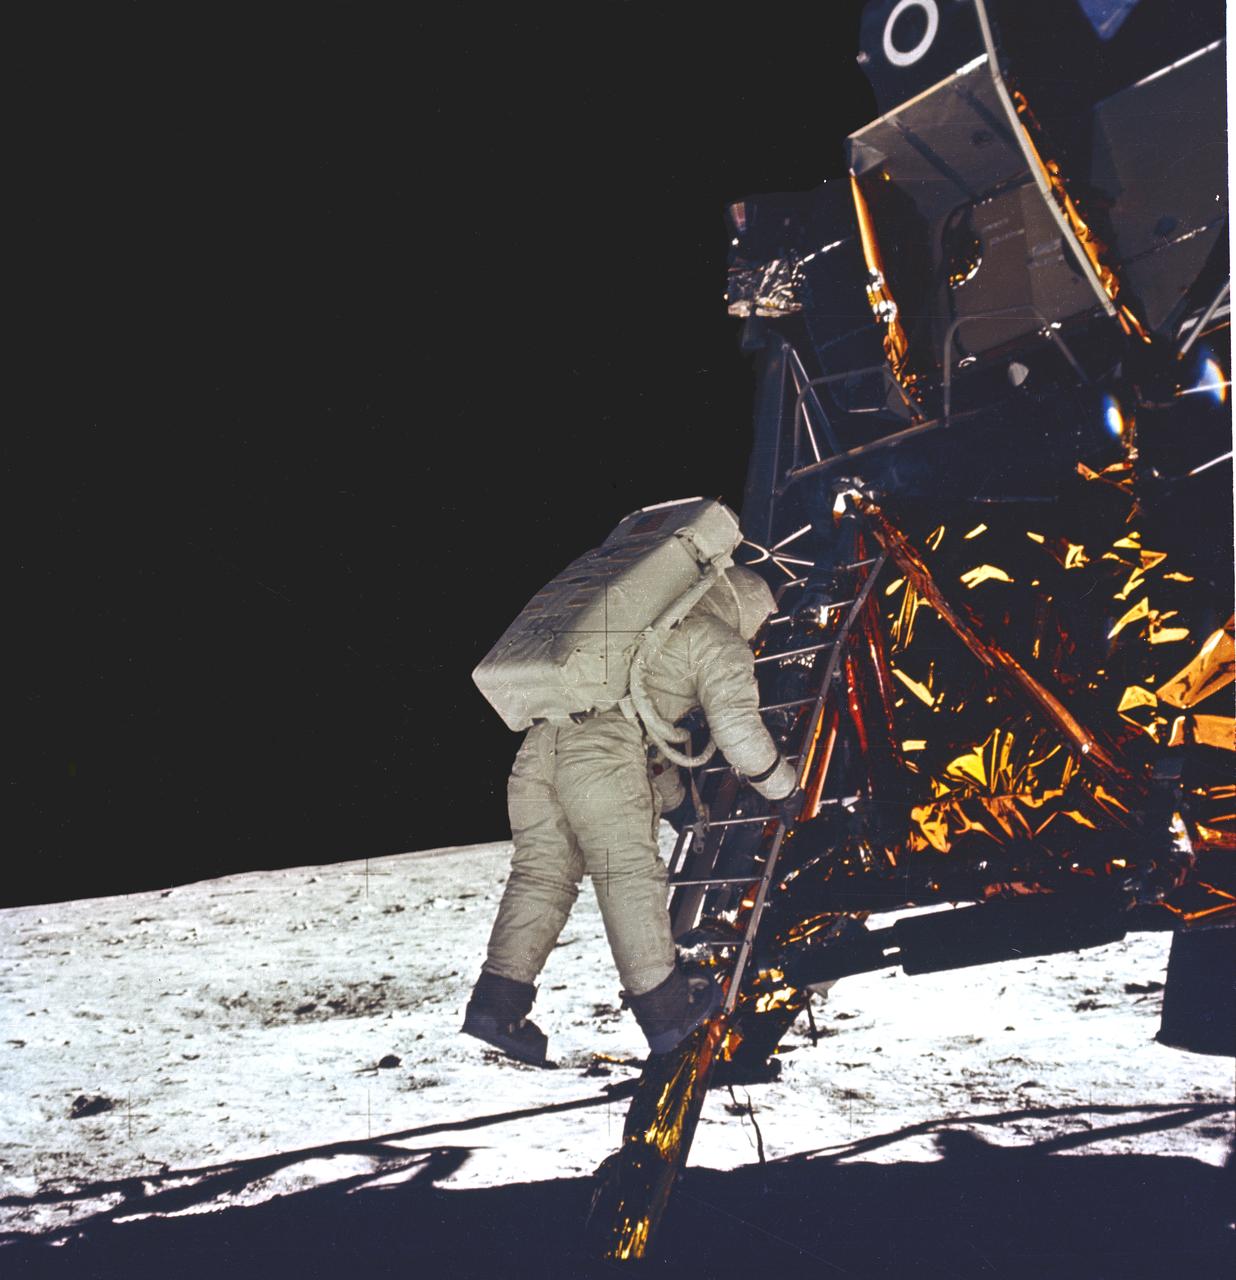 Astronaut astronaut Buzz Aldrin takes his first step onto the surface of the Moon.